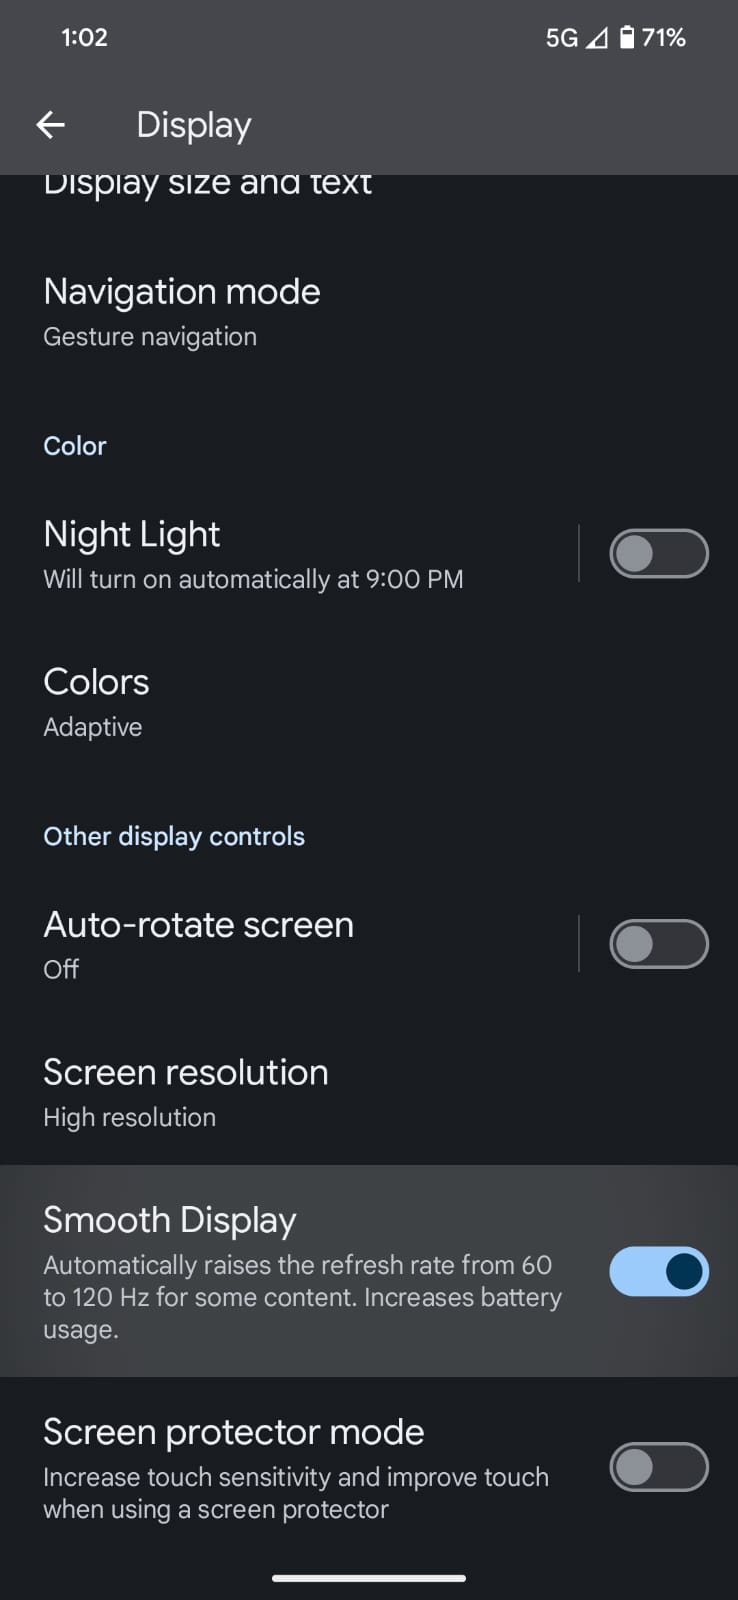 Screenshot of smooth display setting which increases the refresh rate